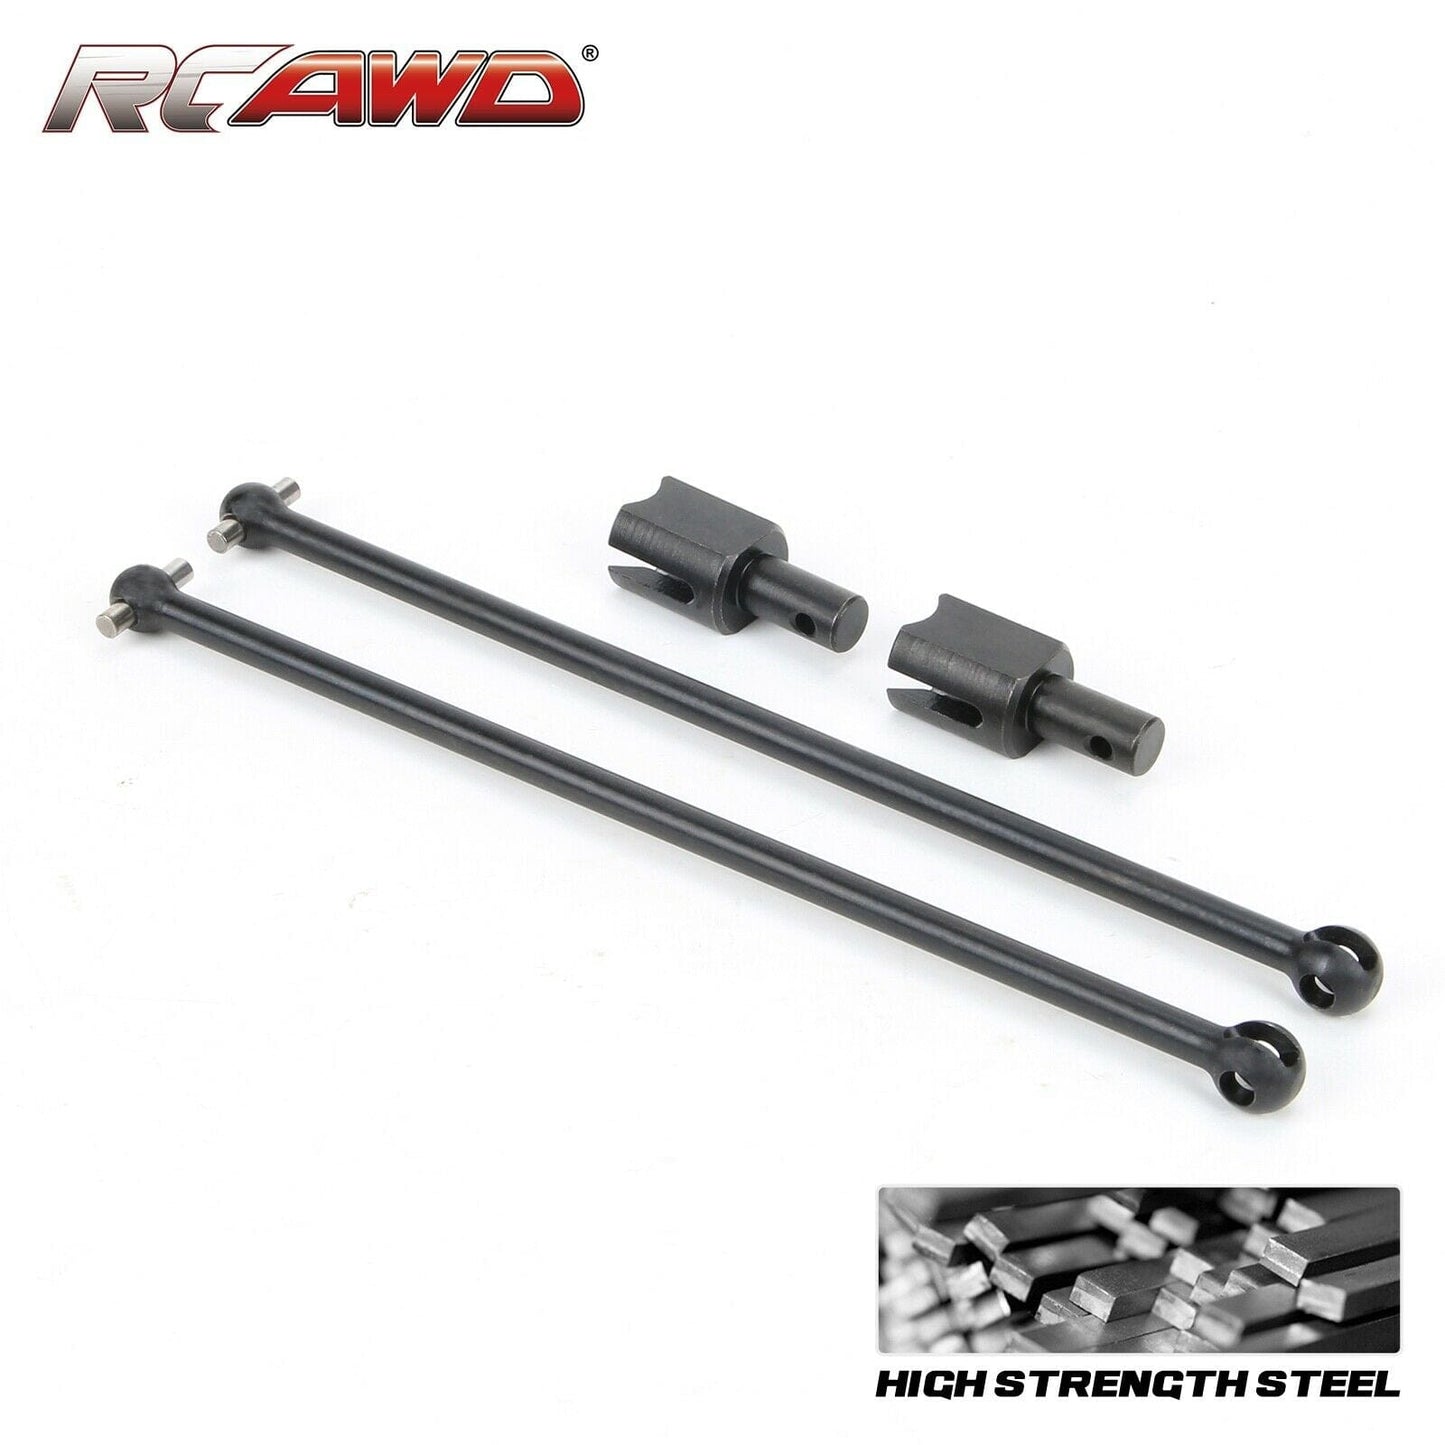 RCAWD ARRMA UPGRADE PARTS RCAWD ARA310926 cvd drive shaft steel diff outdrive FOR arrma 8S KRATON OUTCAST